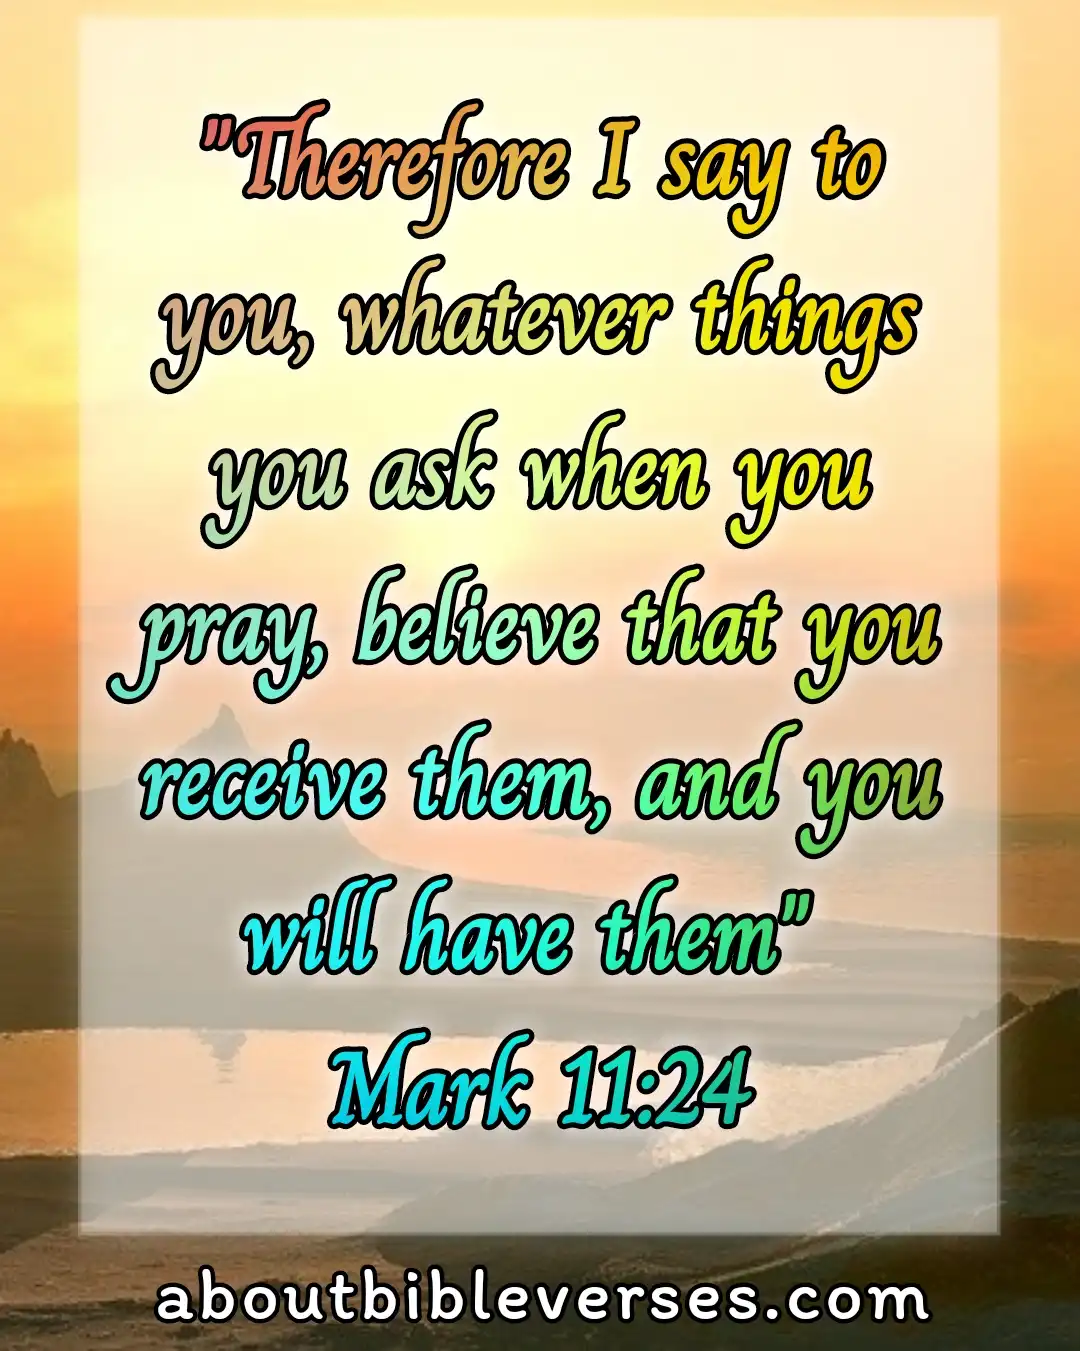 Bible Verses About Praying With Wrong Motive (Mark 11:24)